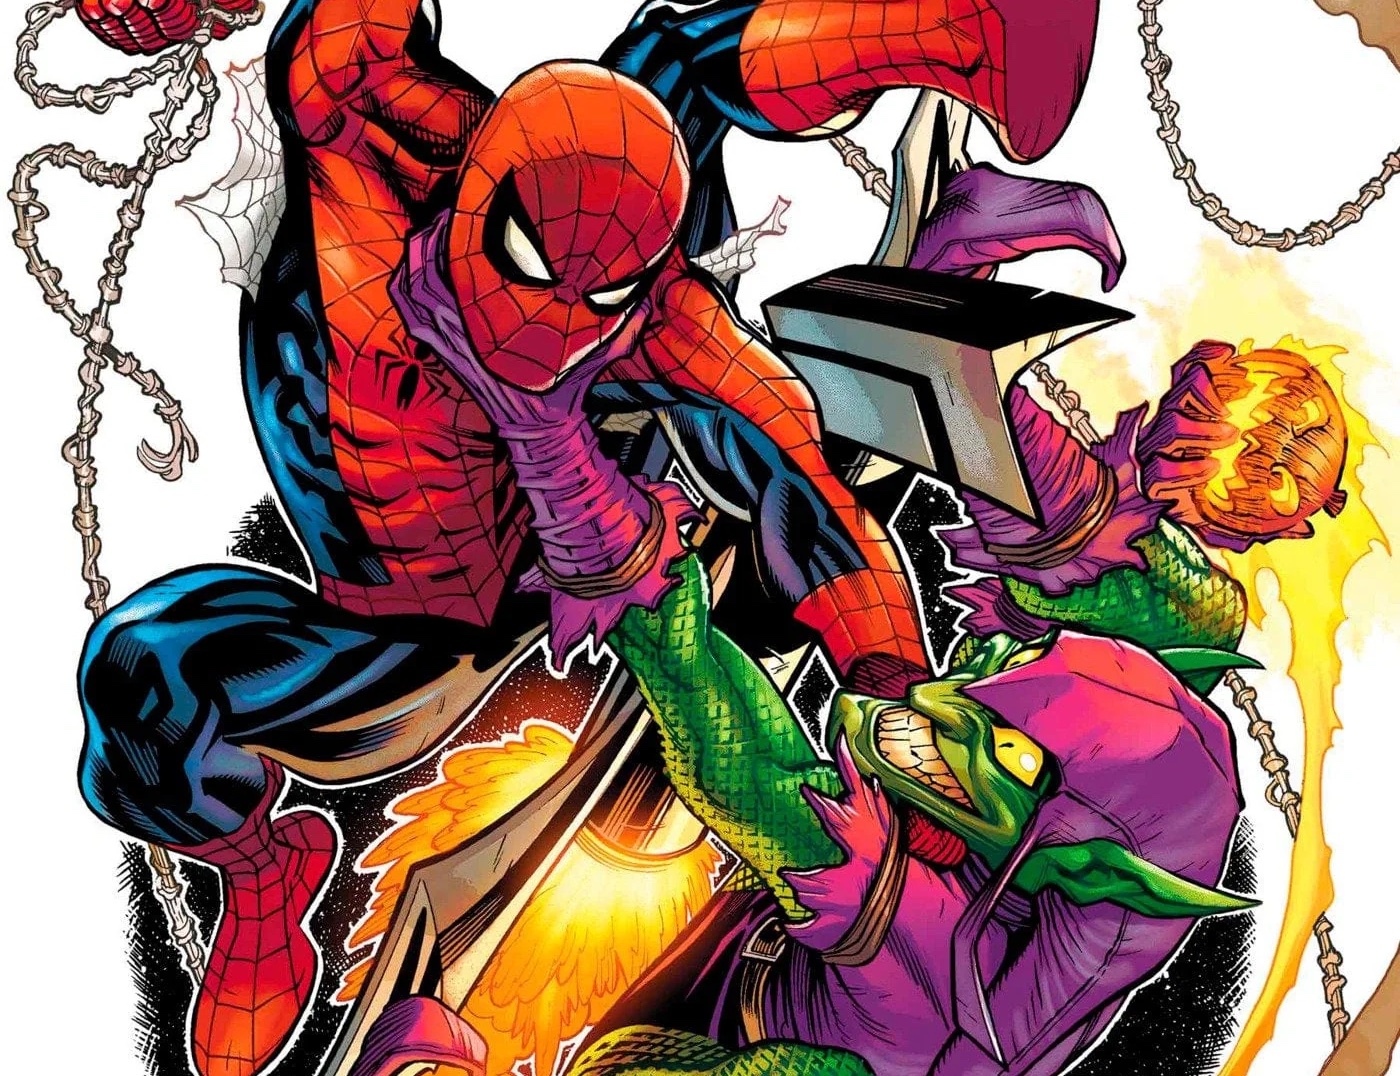 'Amazing Spider-Man' #50 is a stunning visual feast